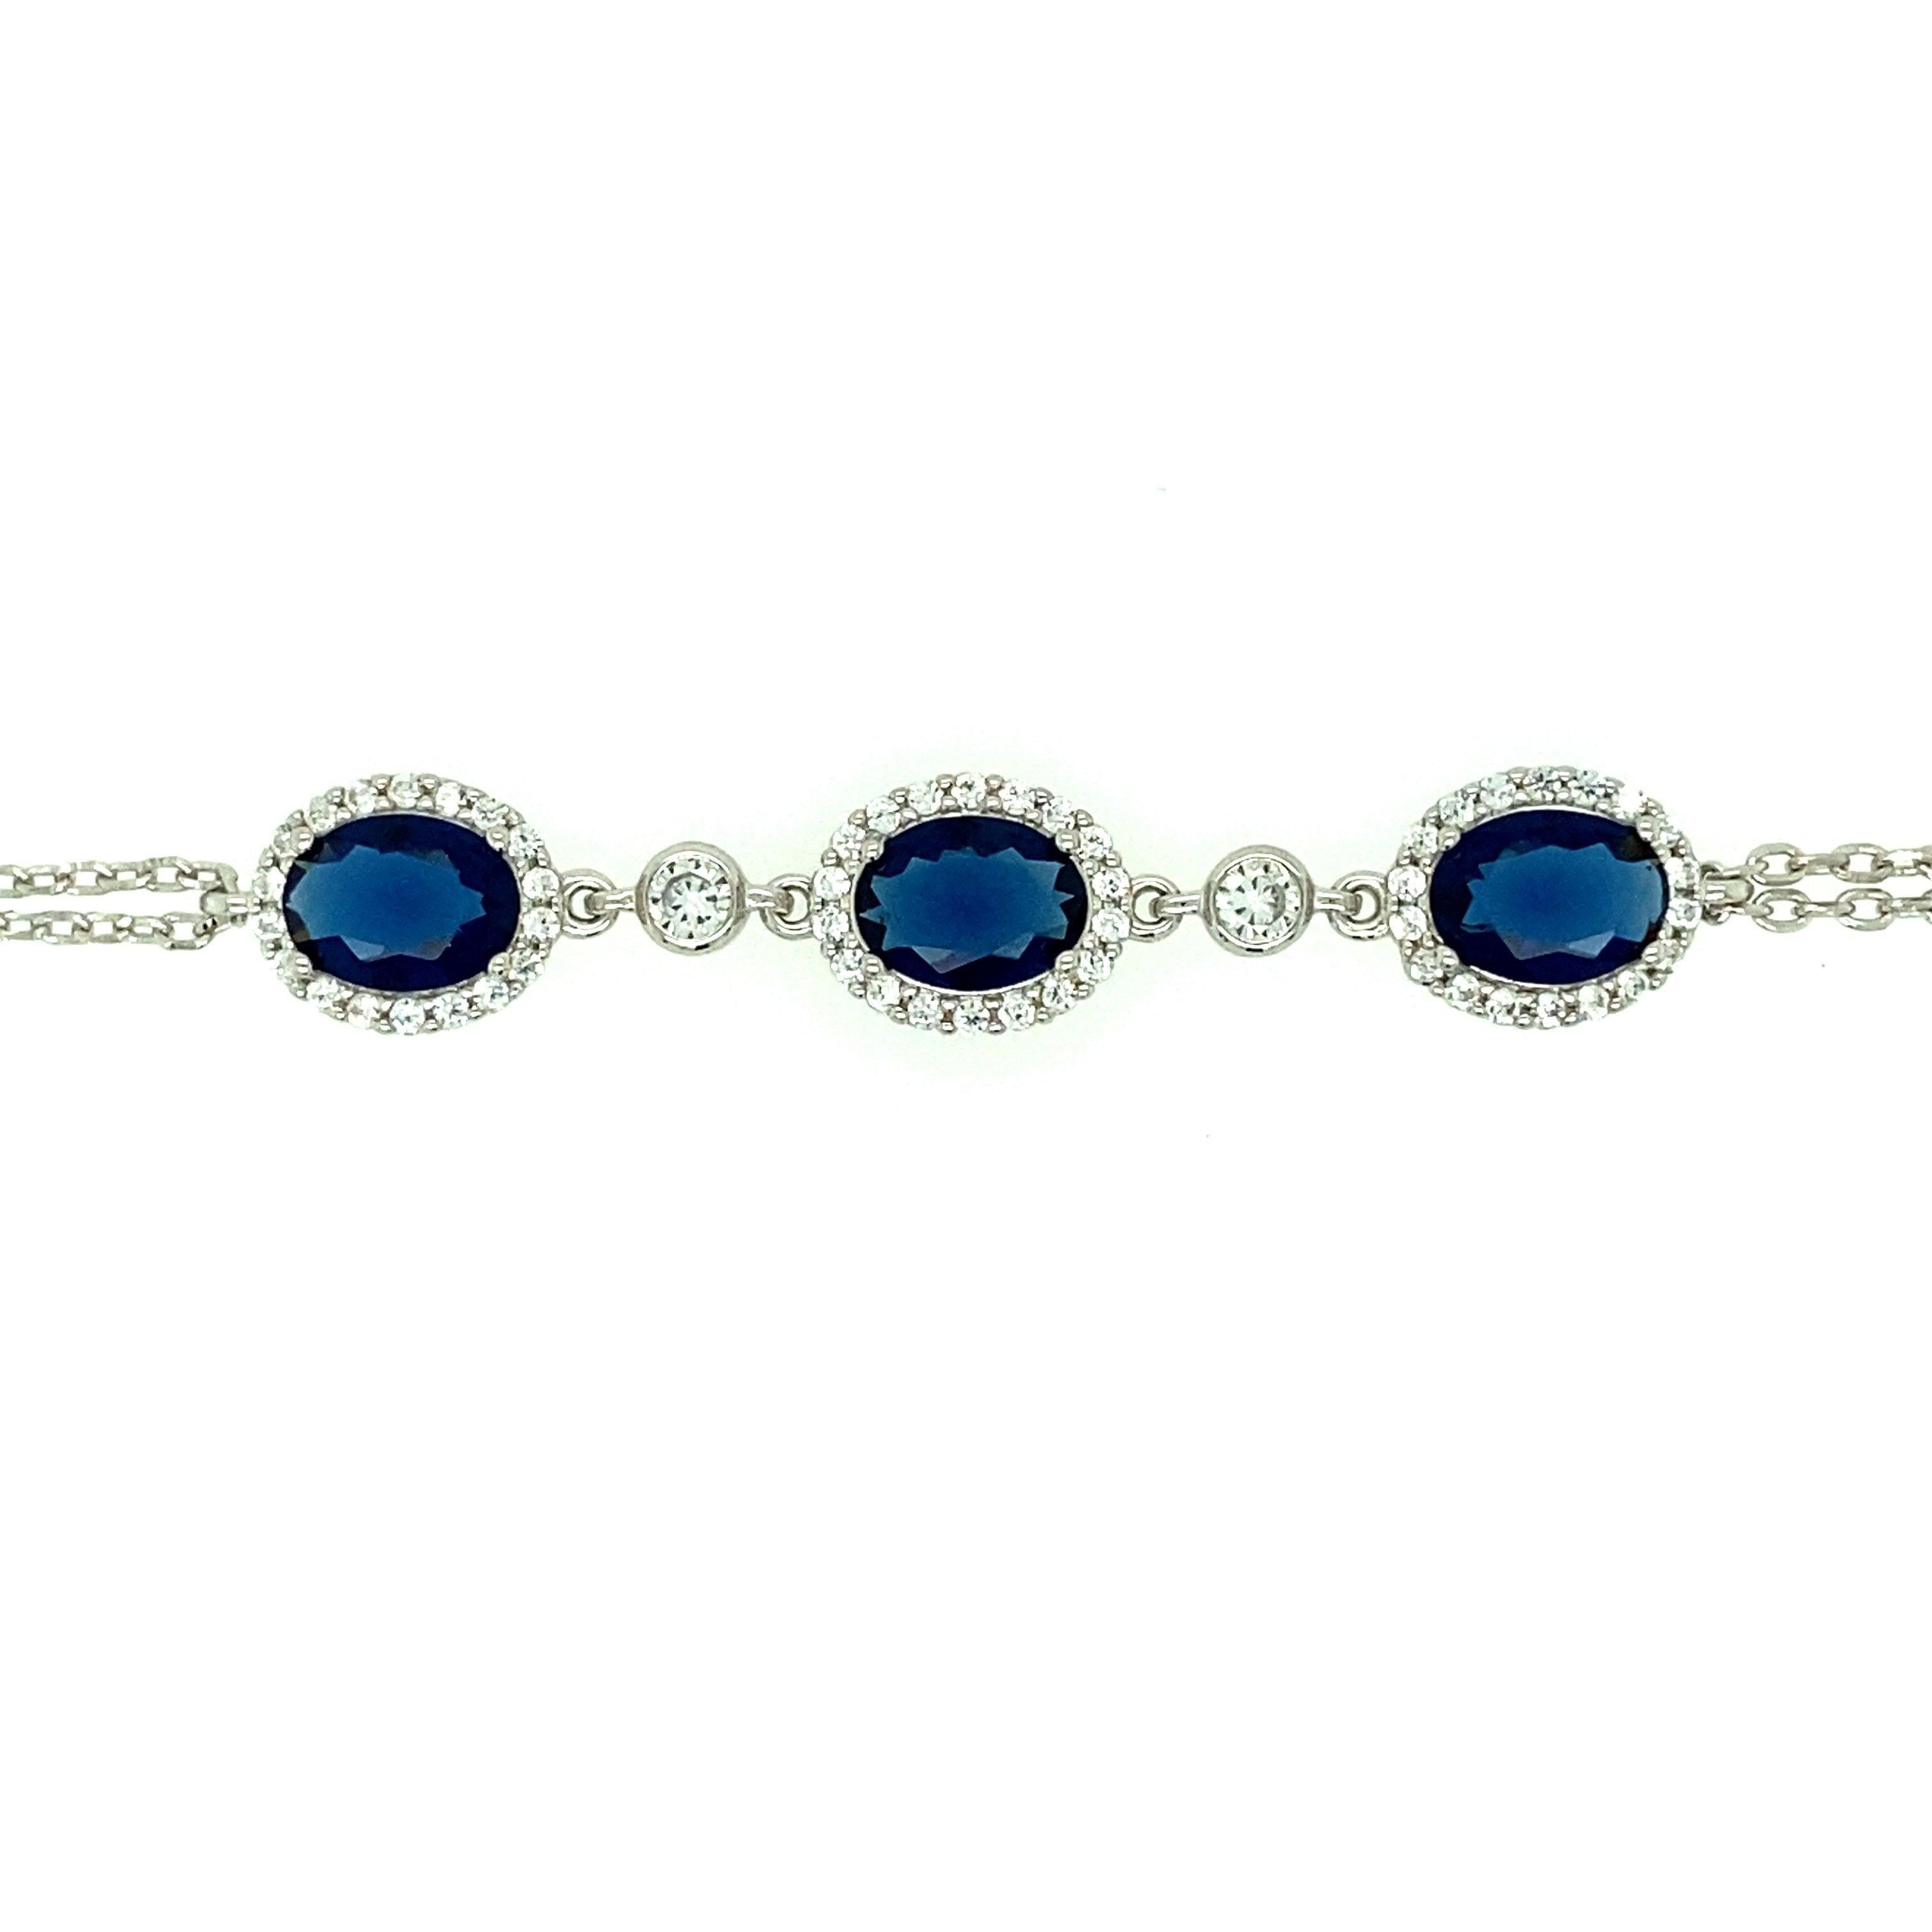 Asfour-Crystal-accessories-Bracelet-b1625-b-925-Sterling-Silver